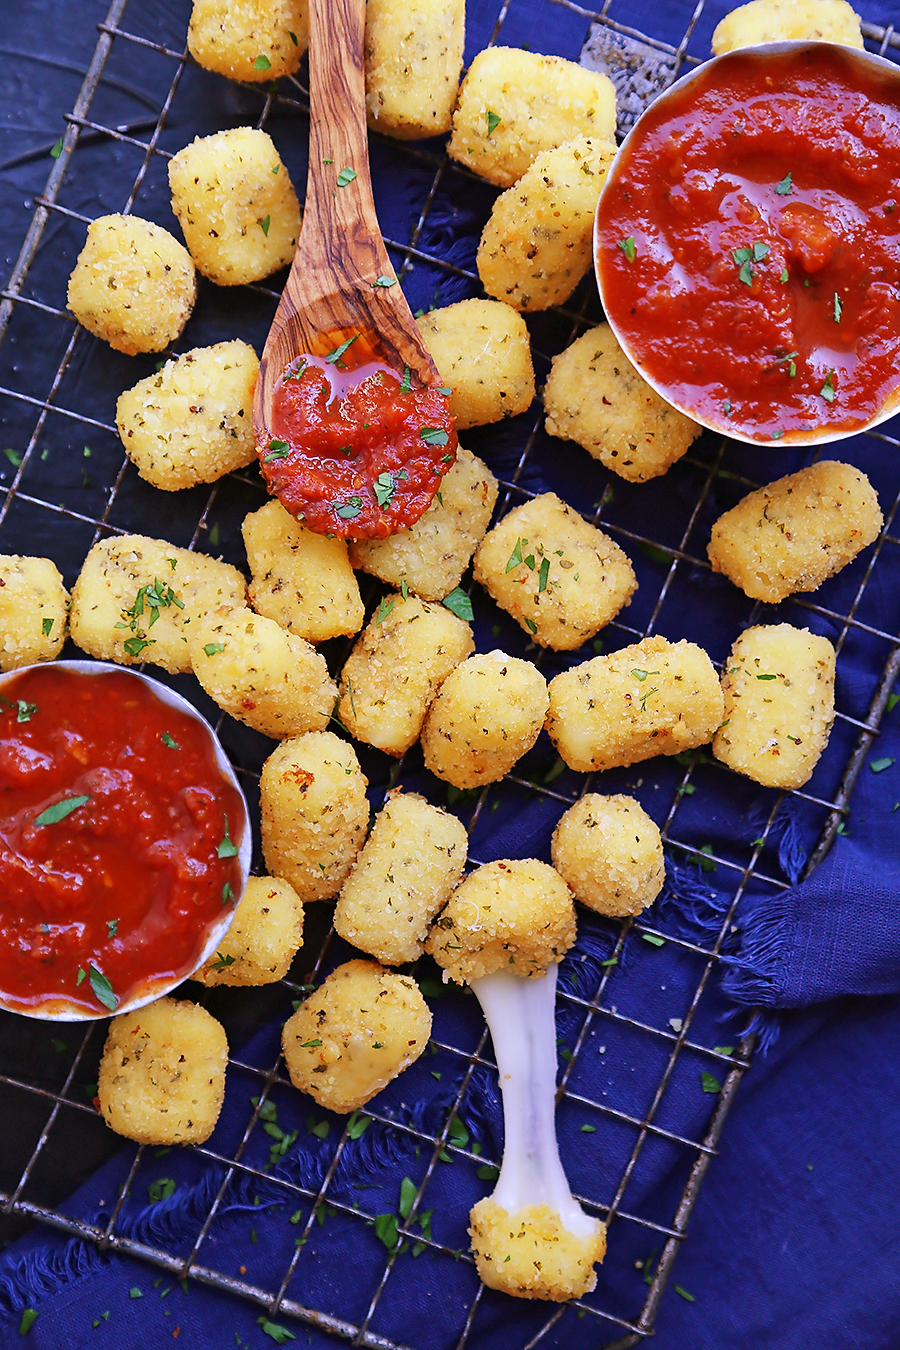 http://www.thecomfortofcooking.com/wp-content/uploads/2021/09/Easy_Fried_Cheese_Bites-4.jpg